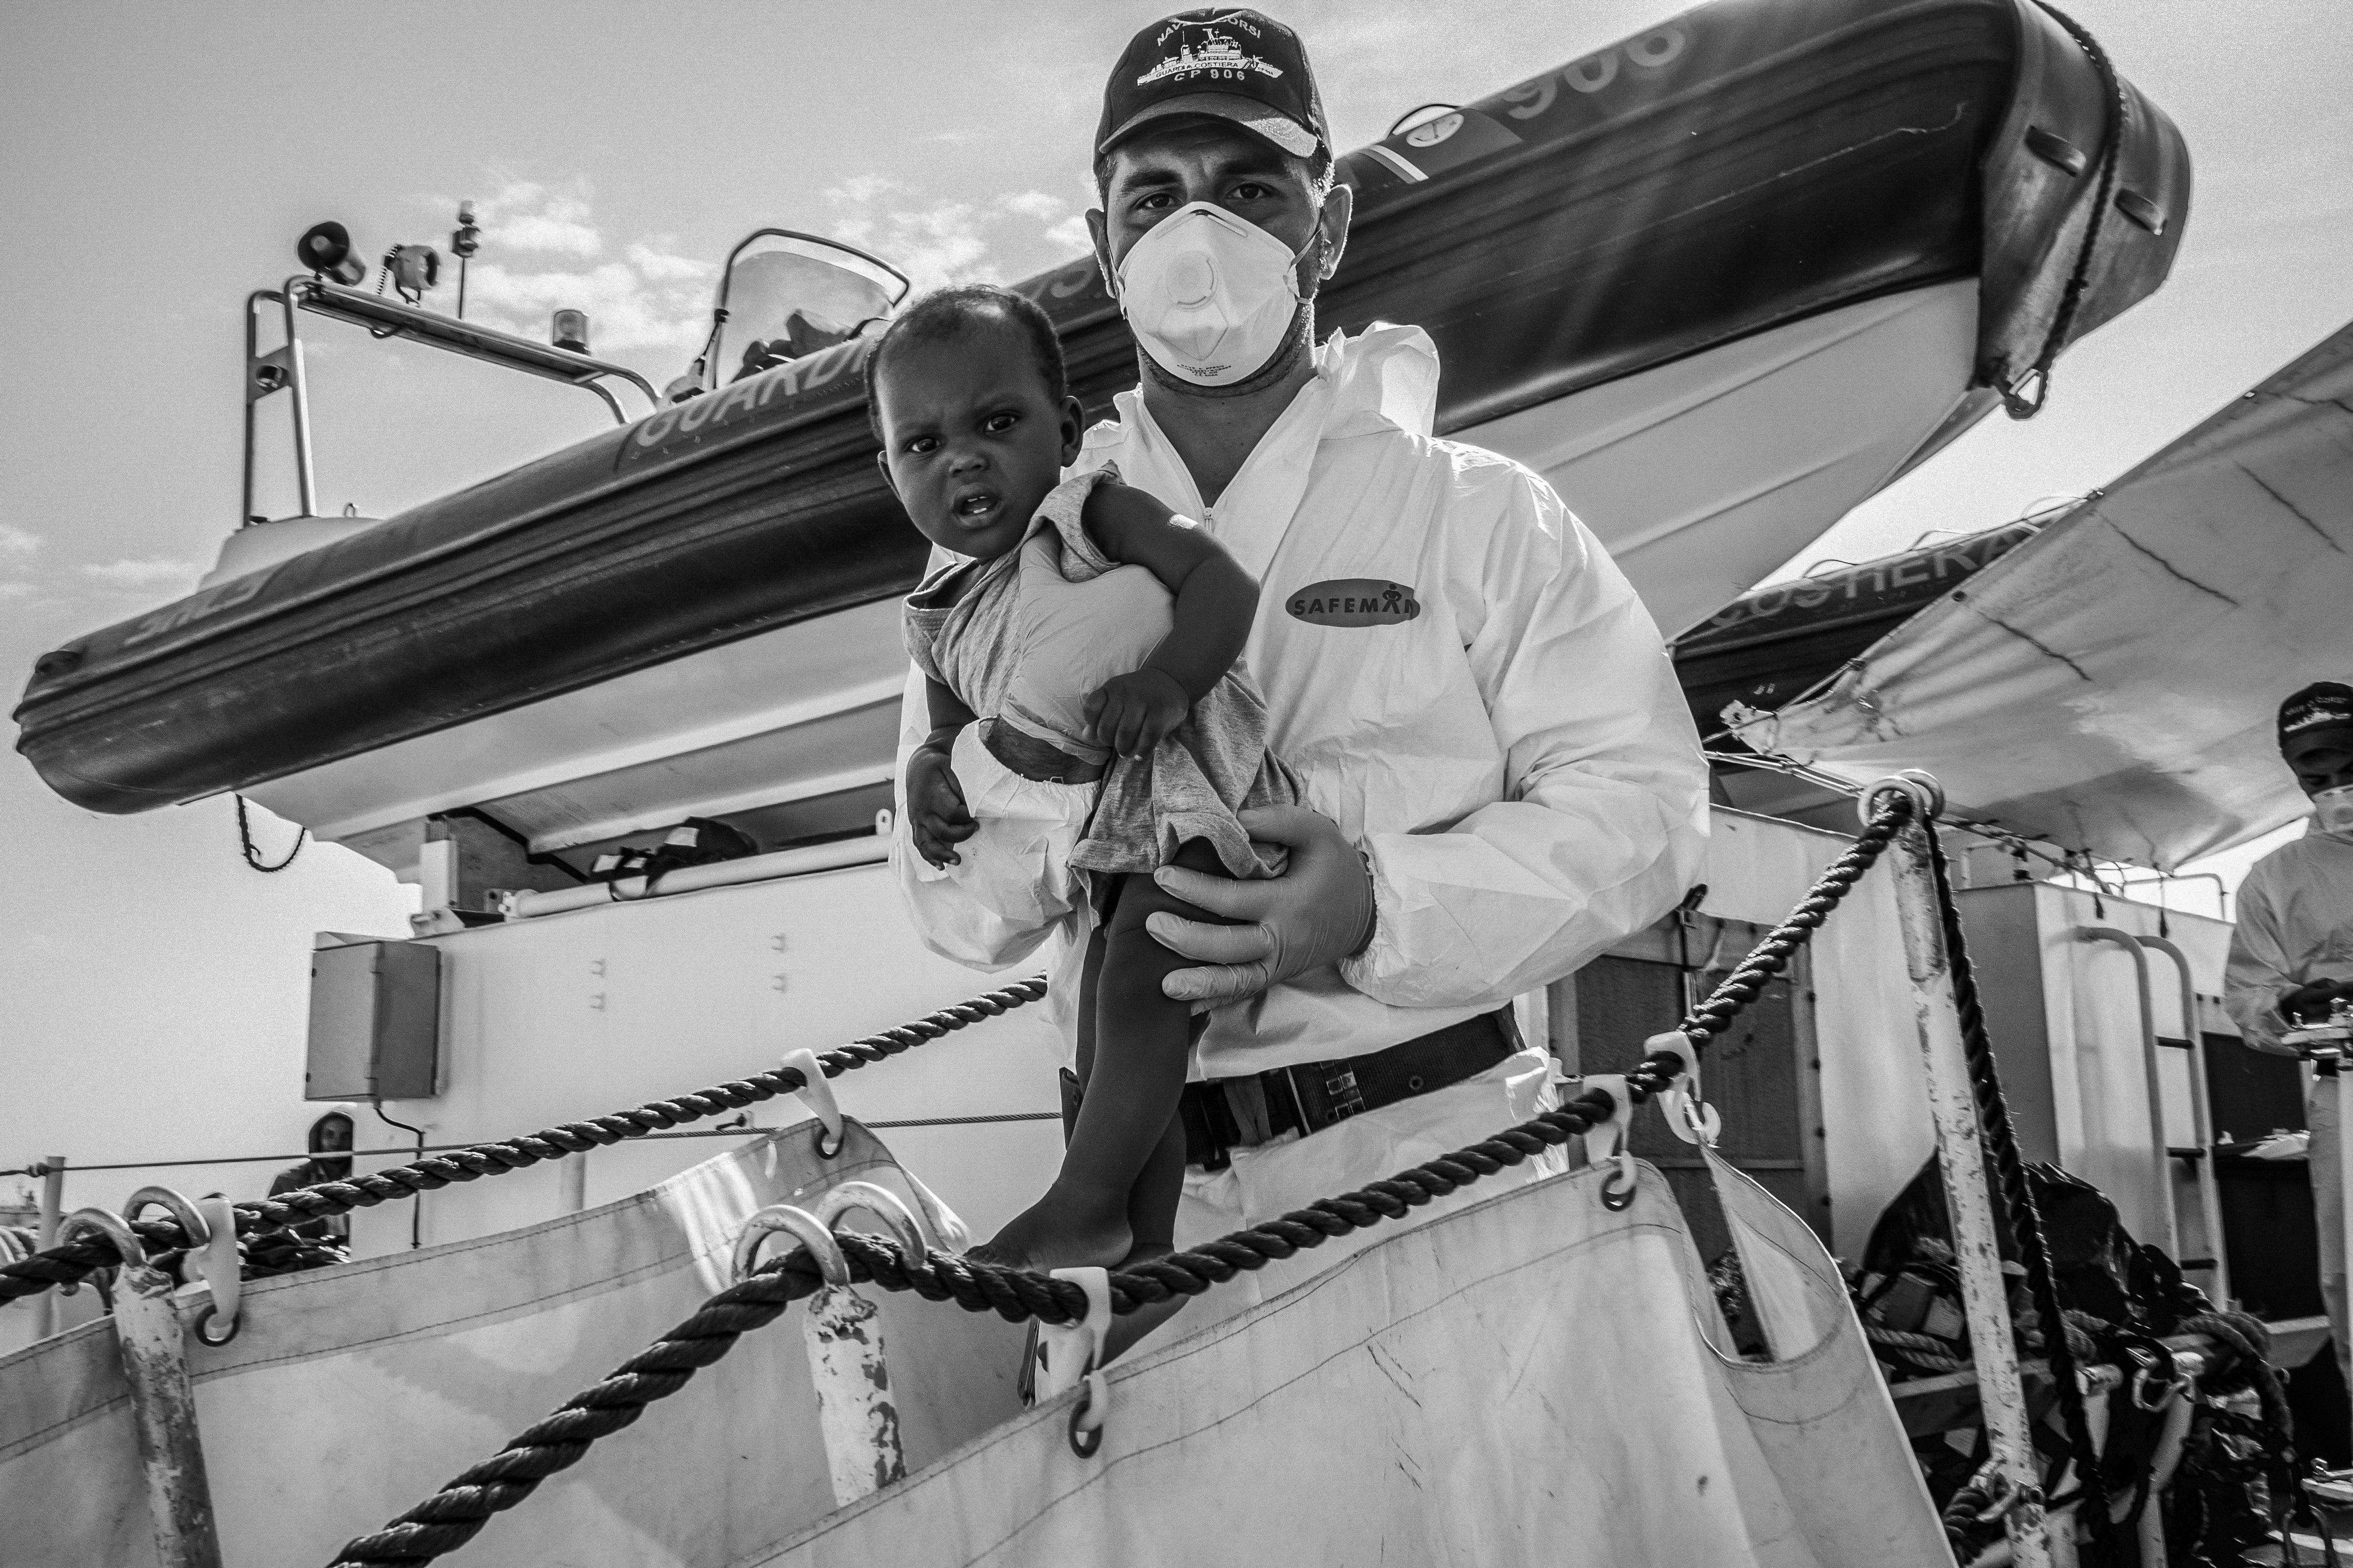 A small sampling of what Giles Clarke got up to in 2014.

An African refugee baby is carried ashore in Sicily having been picked up with 113 migrants who were found floating 30 miles off Libya.